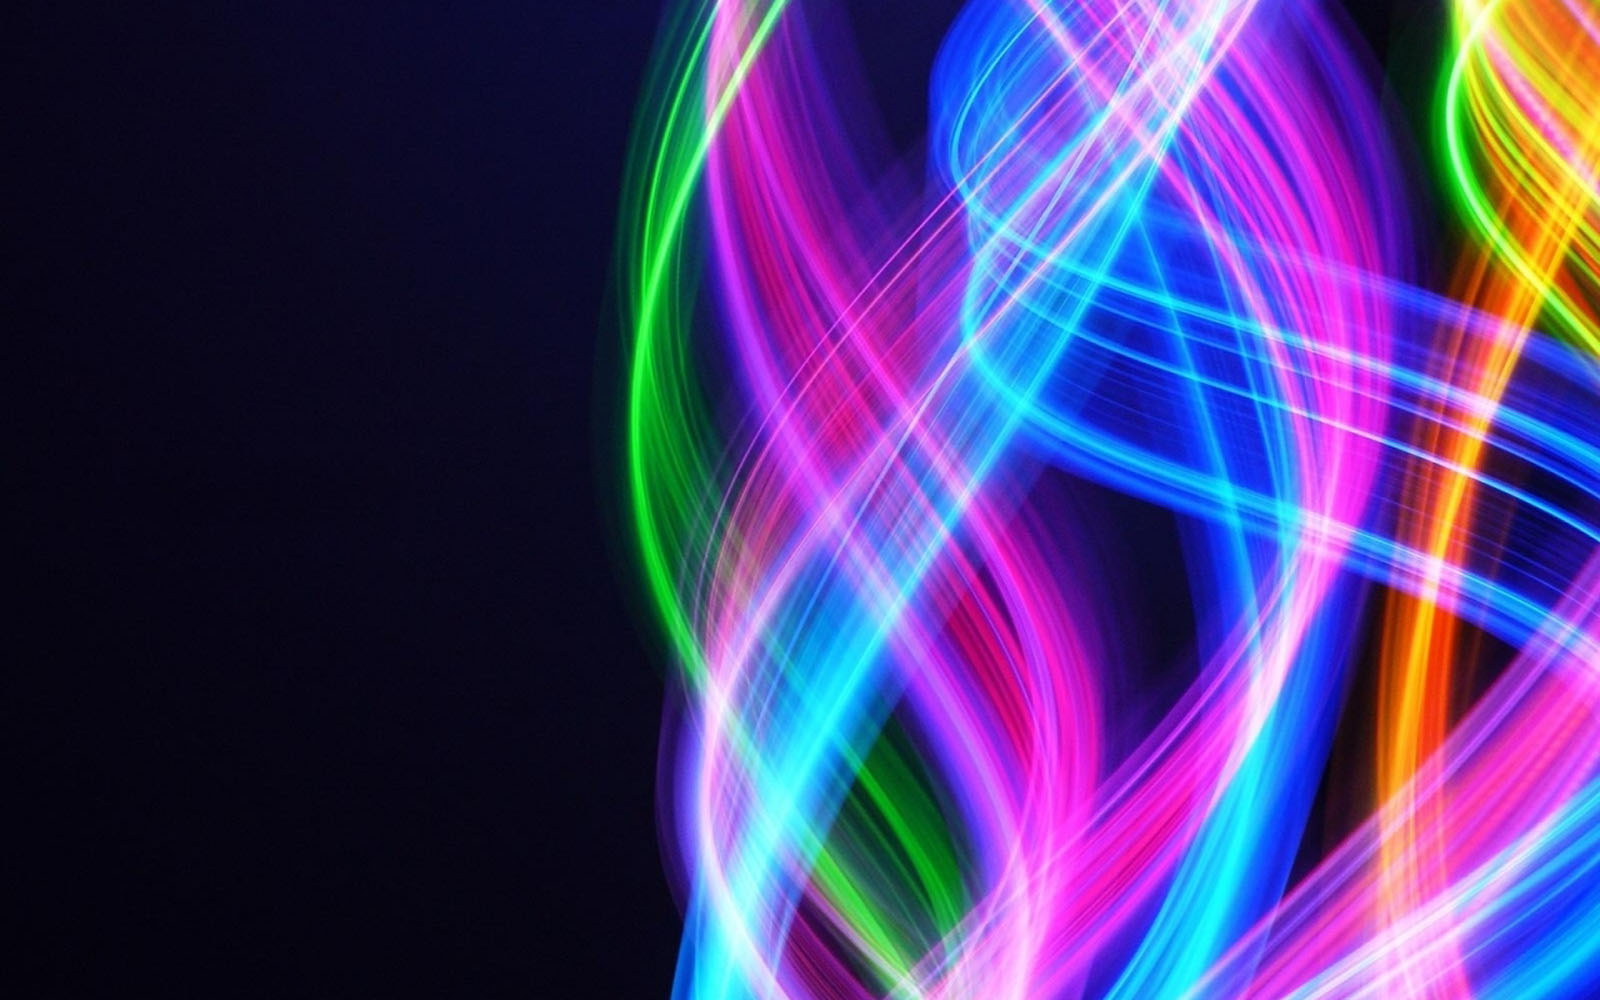 Tag Abstract Neon Wallpaper Image Photos And Pictures For